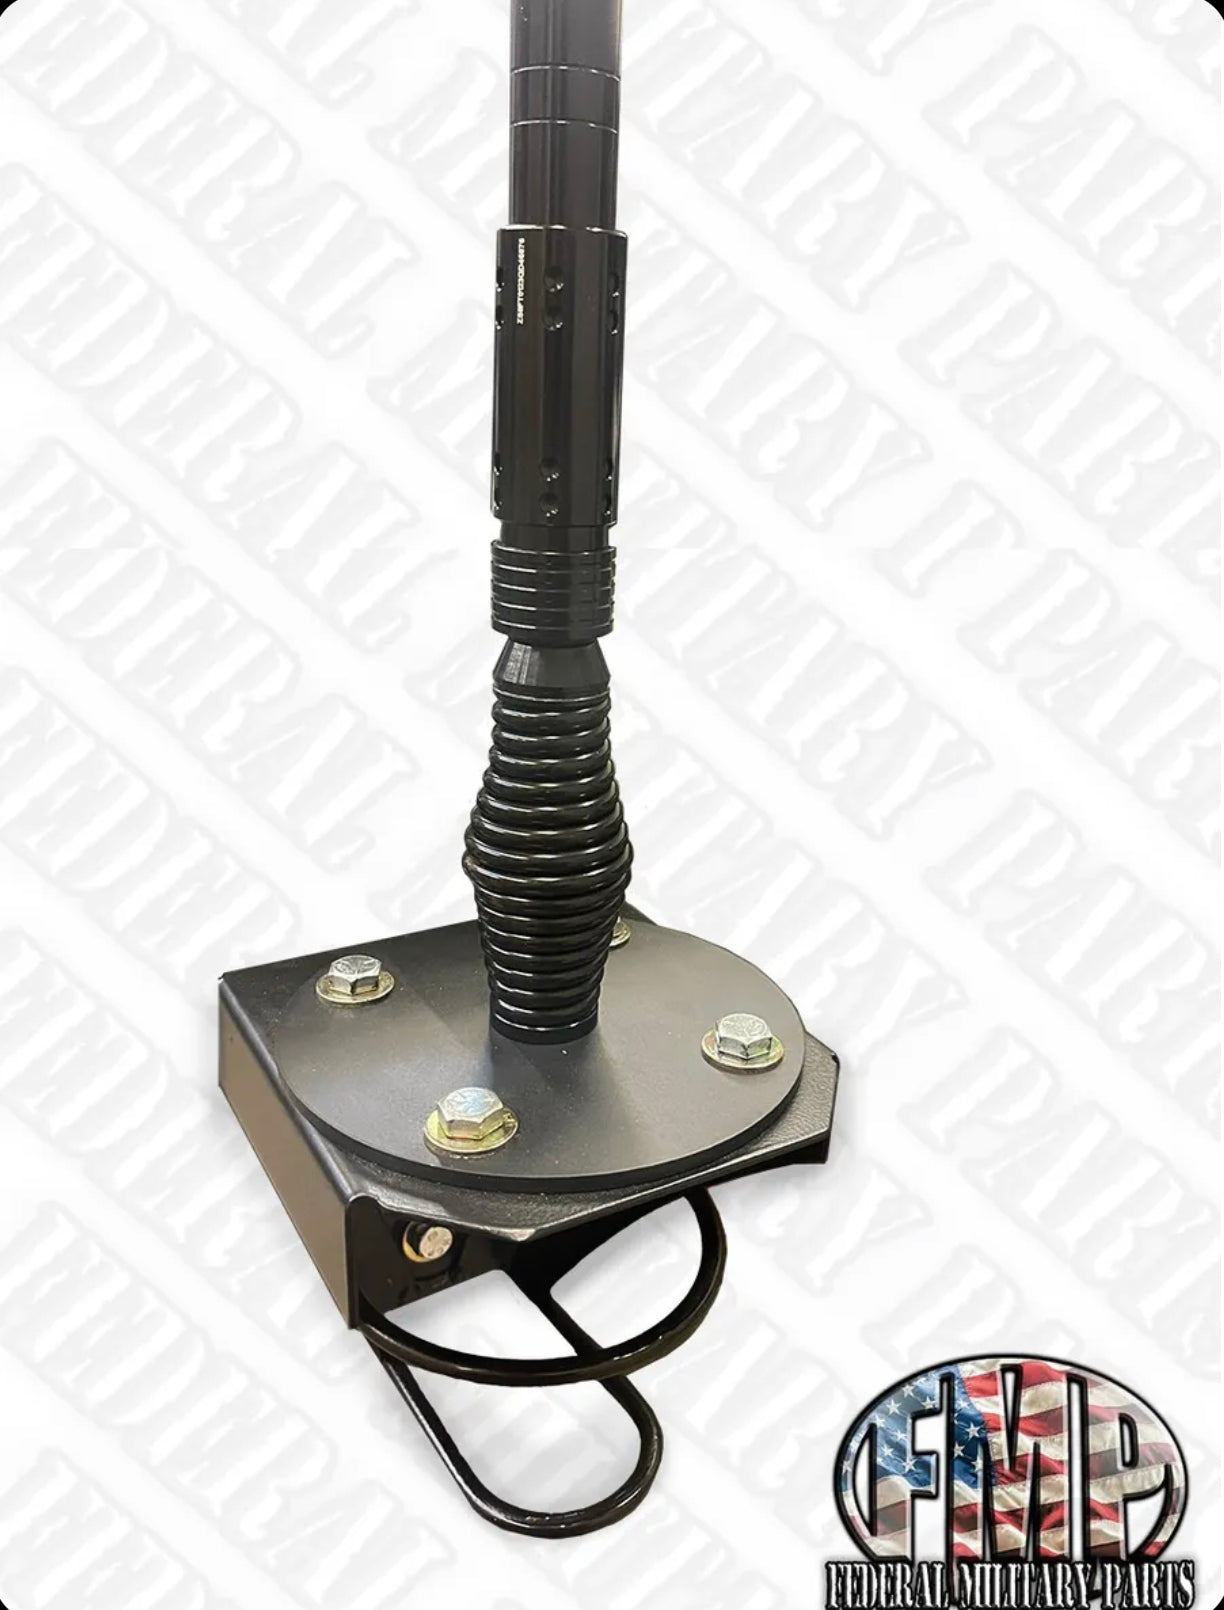 New Military Antenna, Base and Mounting Bracket Kit Not OEM Fits HUMVEE